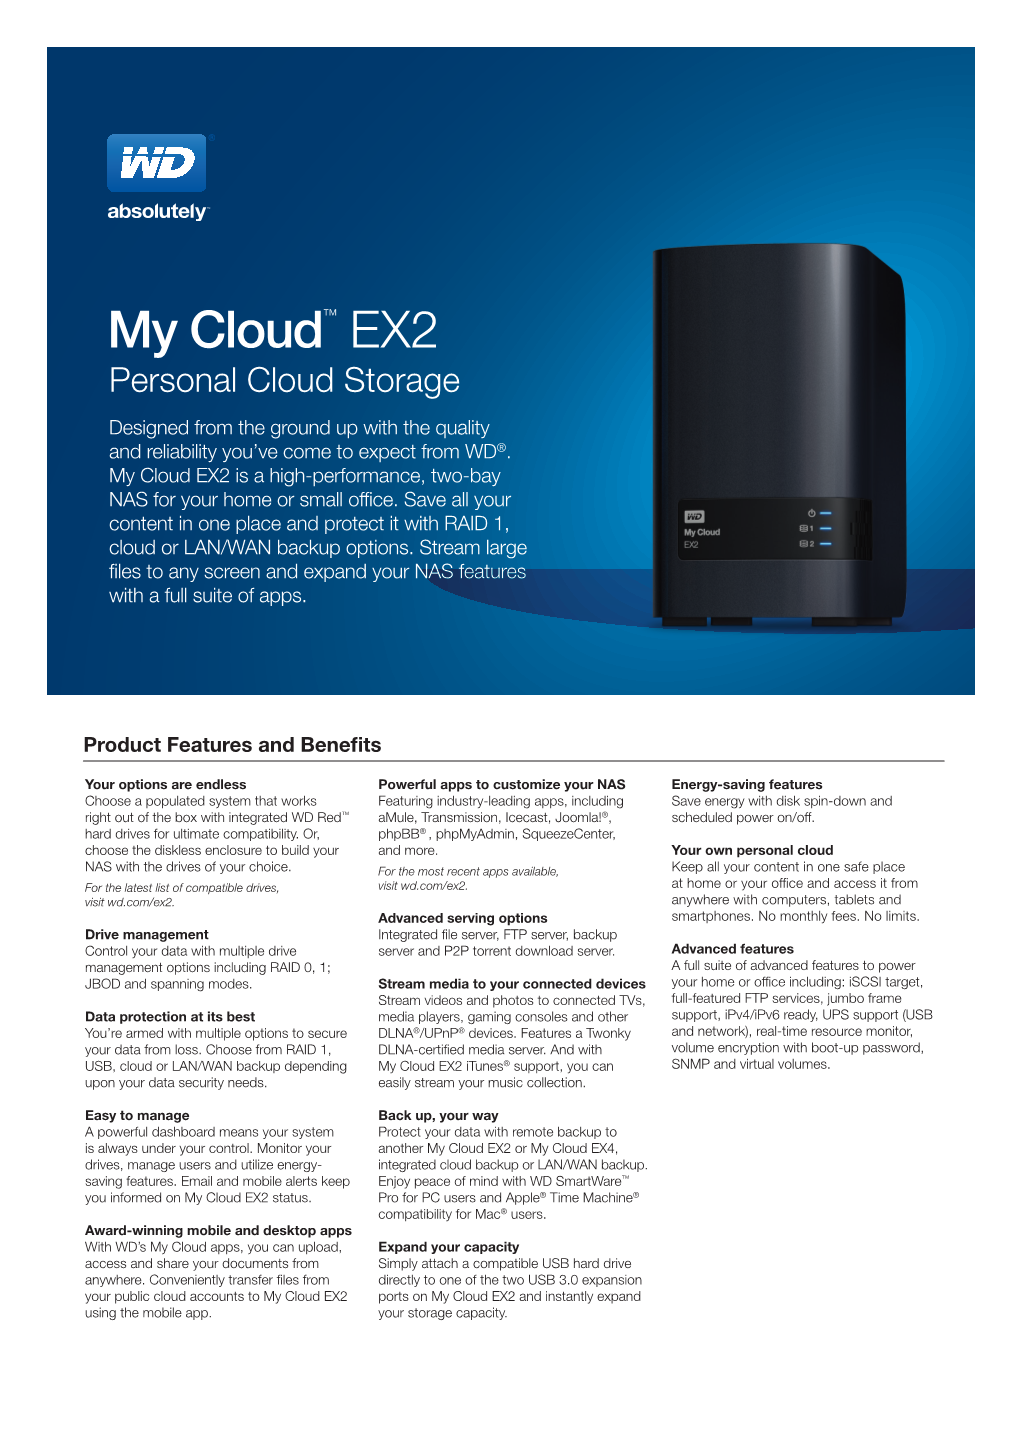 My Cloud™ EX2 Personal Cloud Storage Designed from the Ground up with the Quality and Reliability You’Ve Come to Expect from WD®